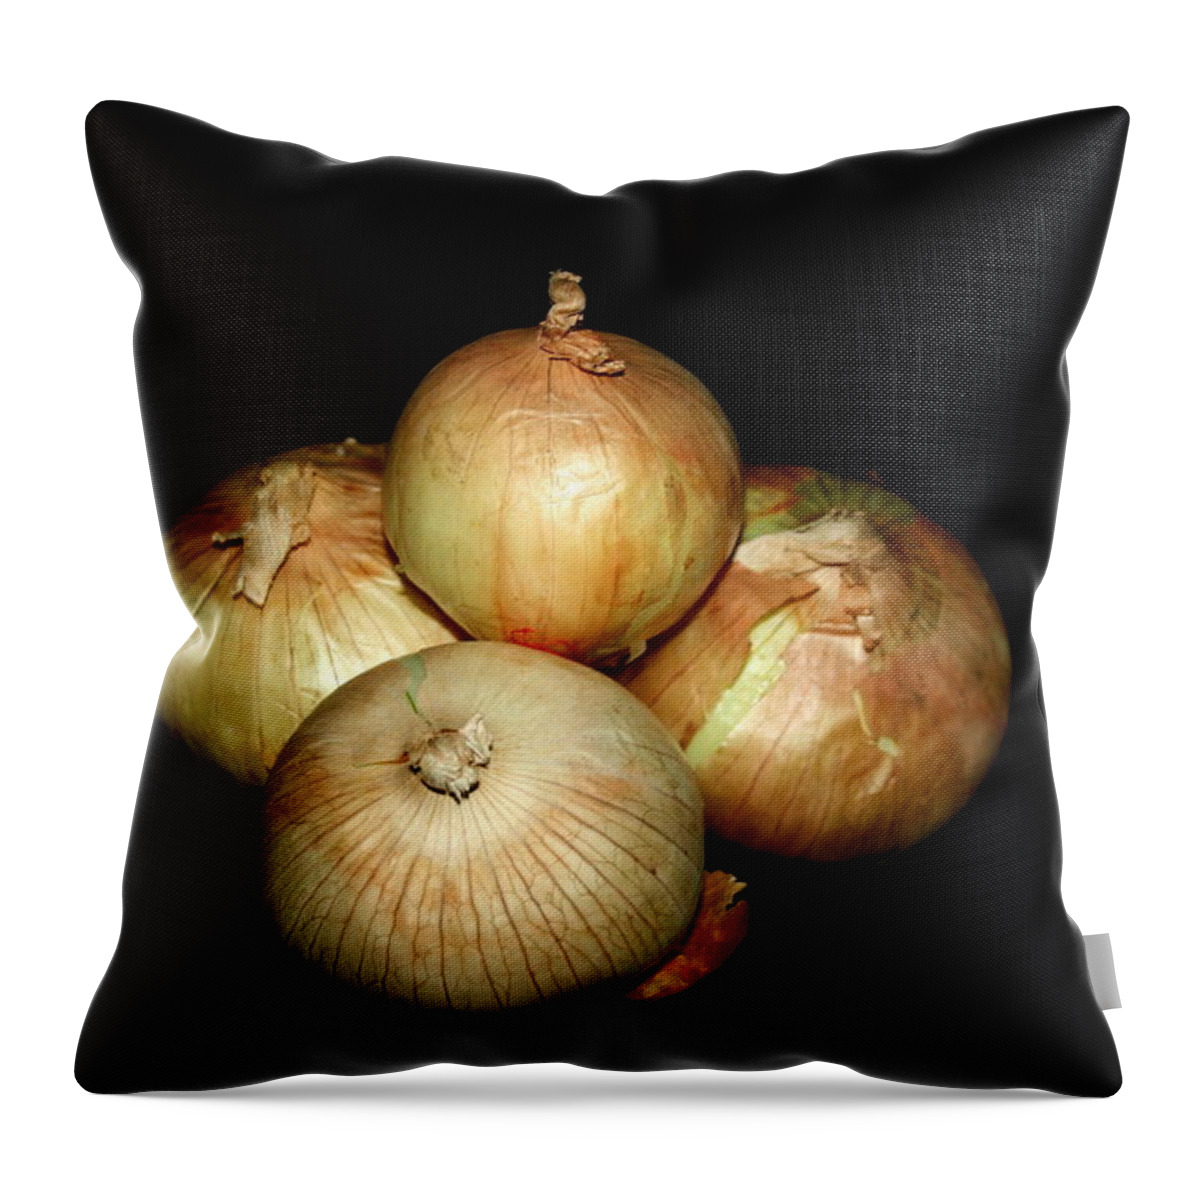 Onions Throw Pillow featuring the photograph Bunch of Onions by Cathy Harper